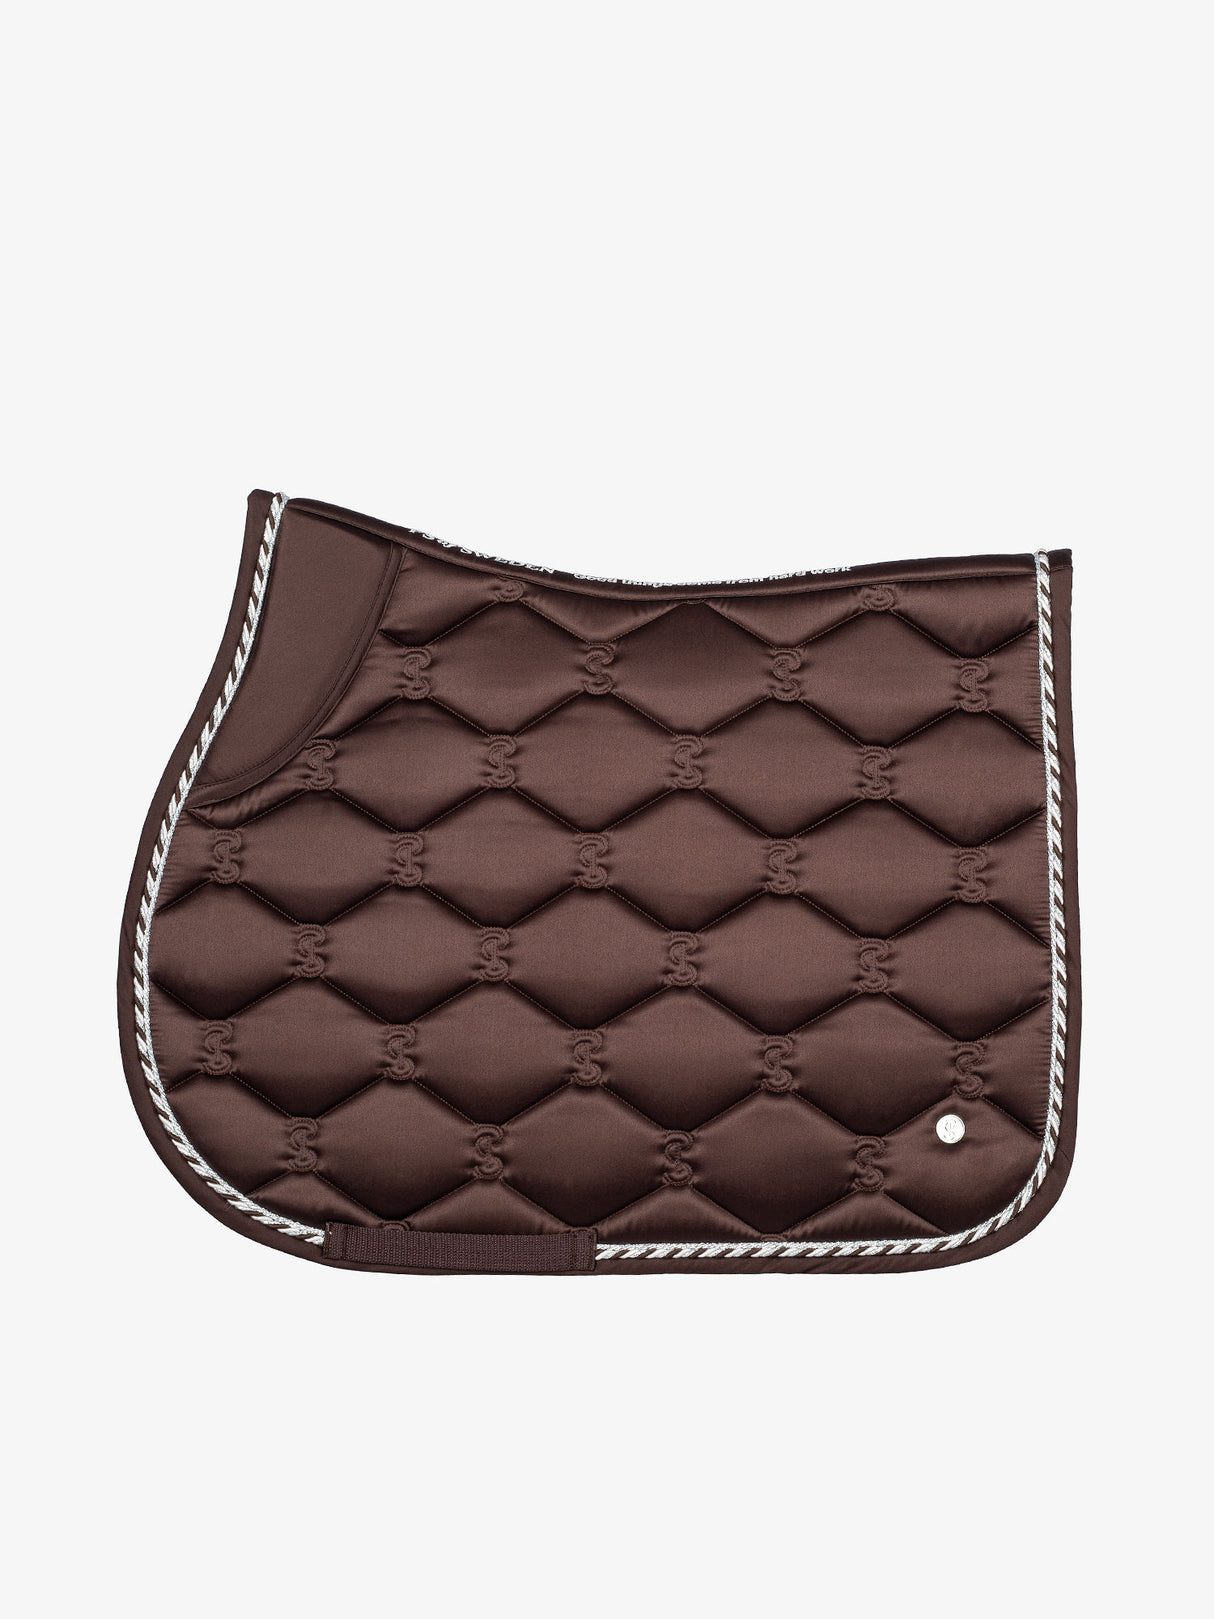 PS of Sweden Signature Jump Saddle Pad Coffee